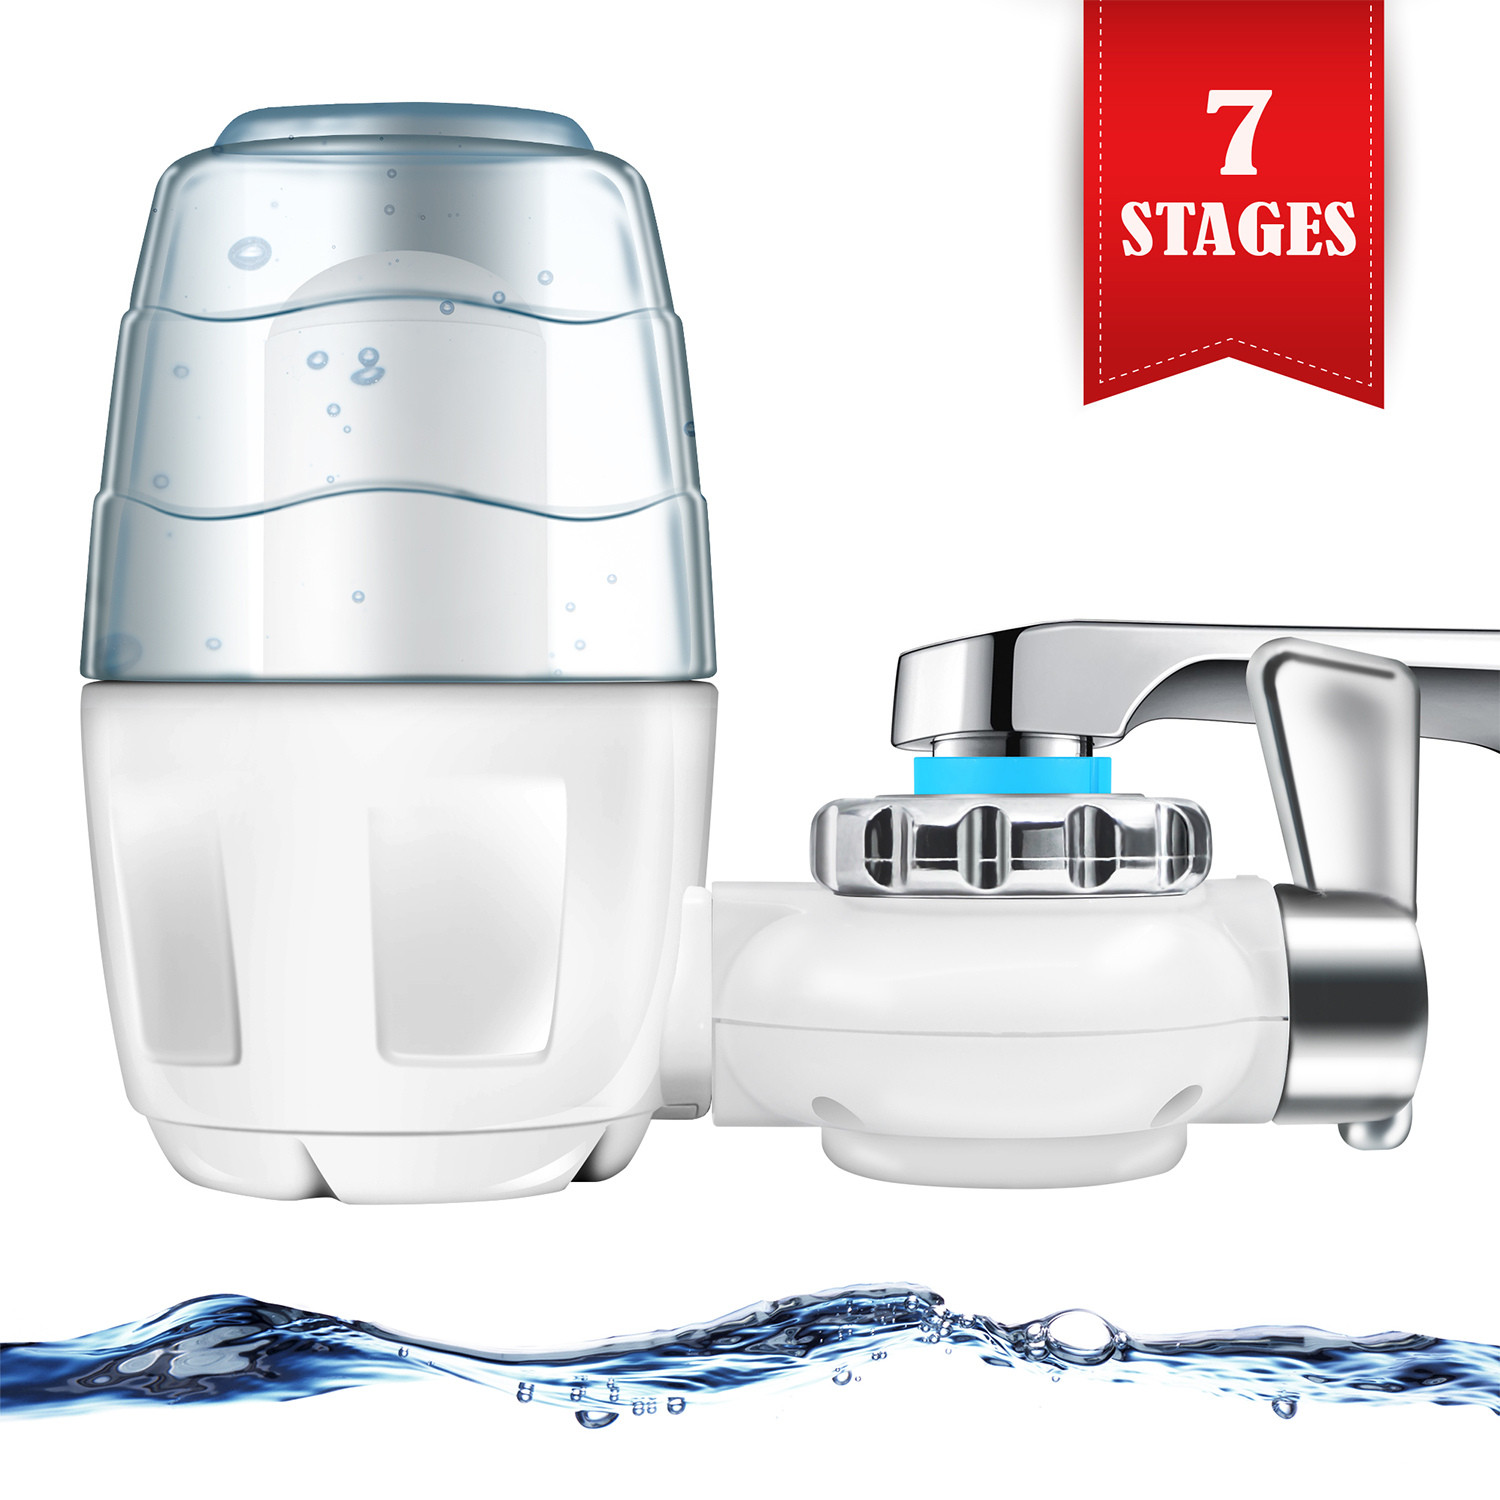 Bathroom Faucet Filter
 Faucet Water Filter BigRoof Universal 7 Stages Water